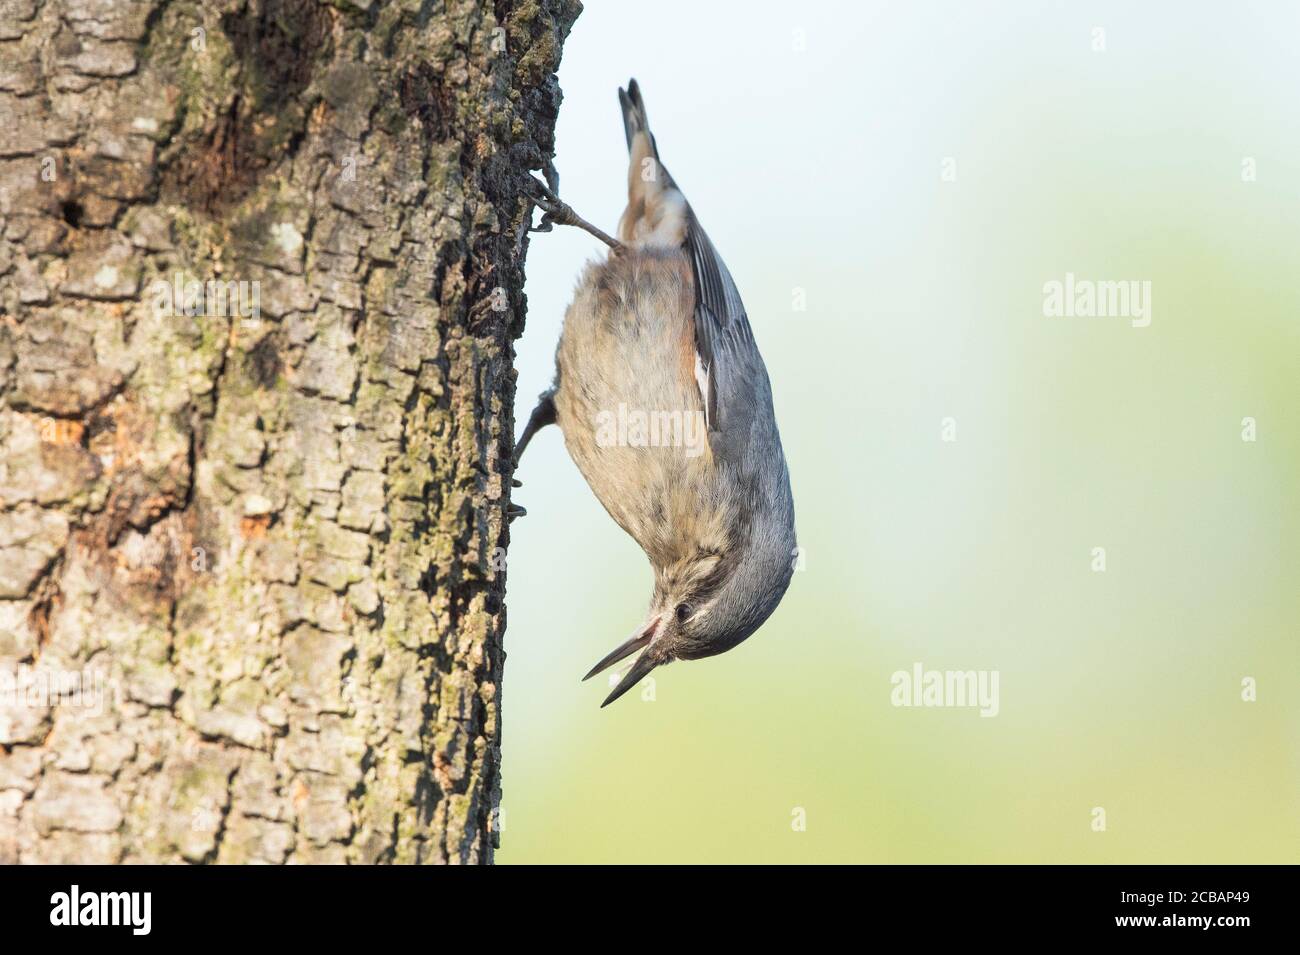 Sitta europaea.  Wood nuthatch is a unique bird, due to its ability to descend through tree trunks. Stock Photo